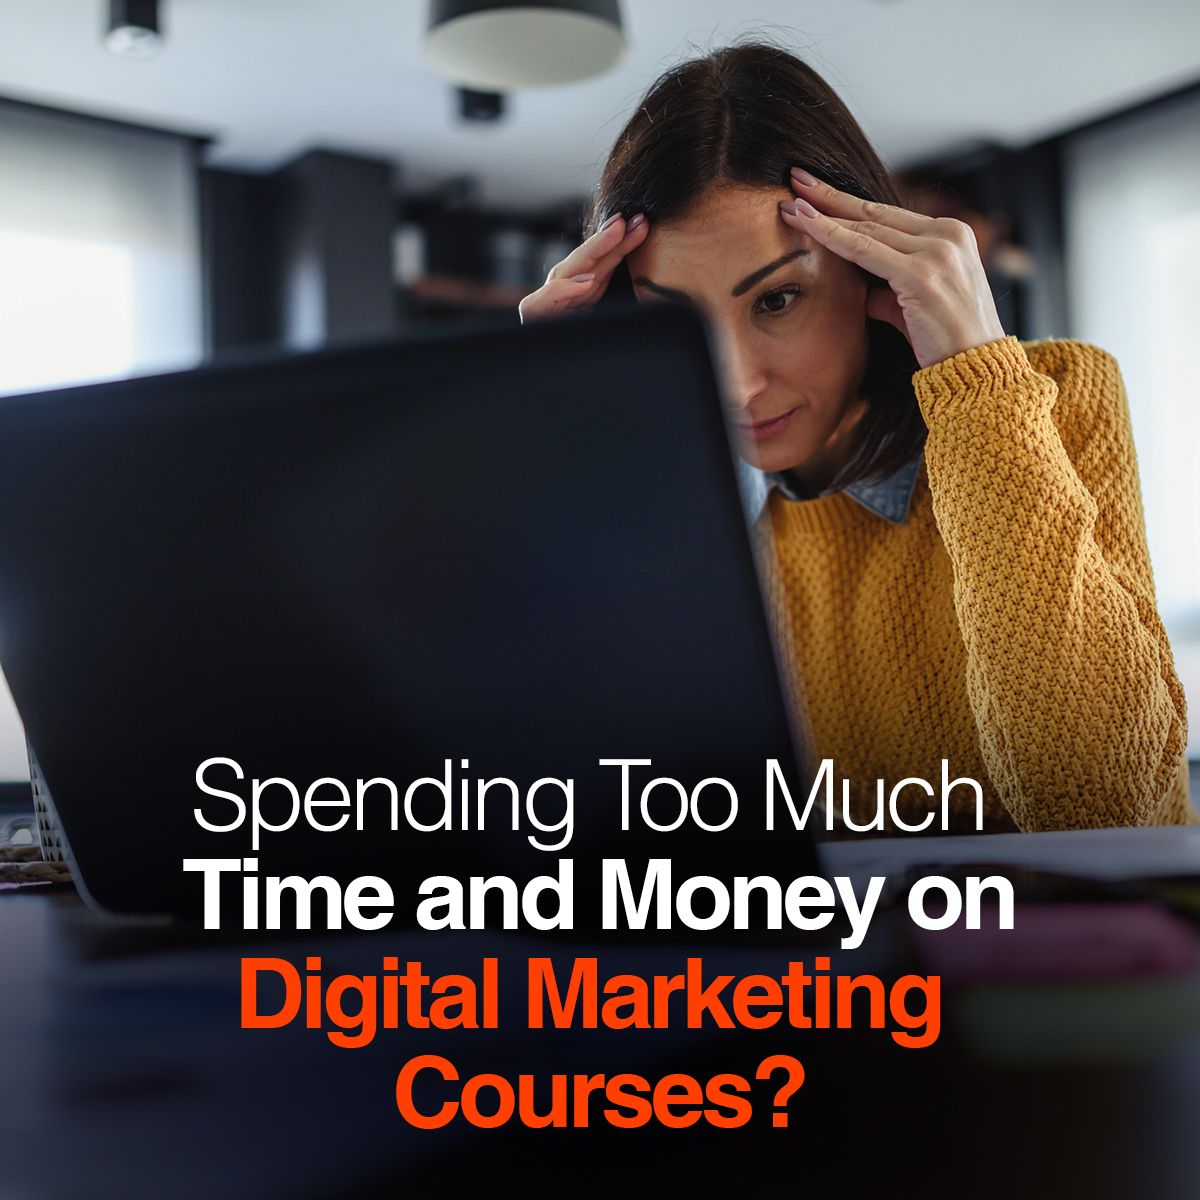 Spending Too Much Time and Money on Digital Marketing Courses?